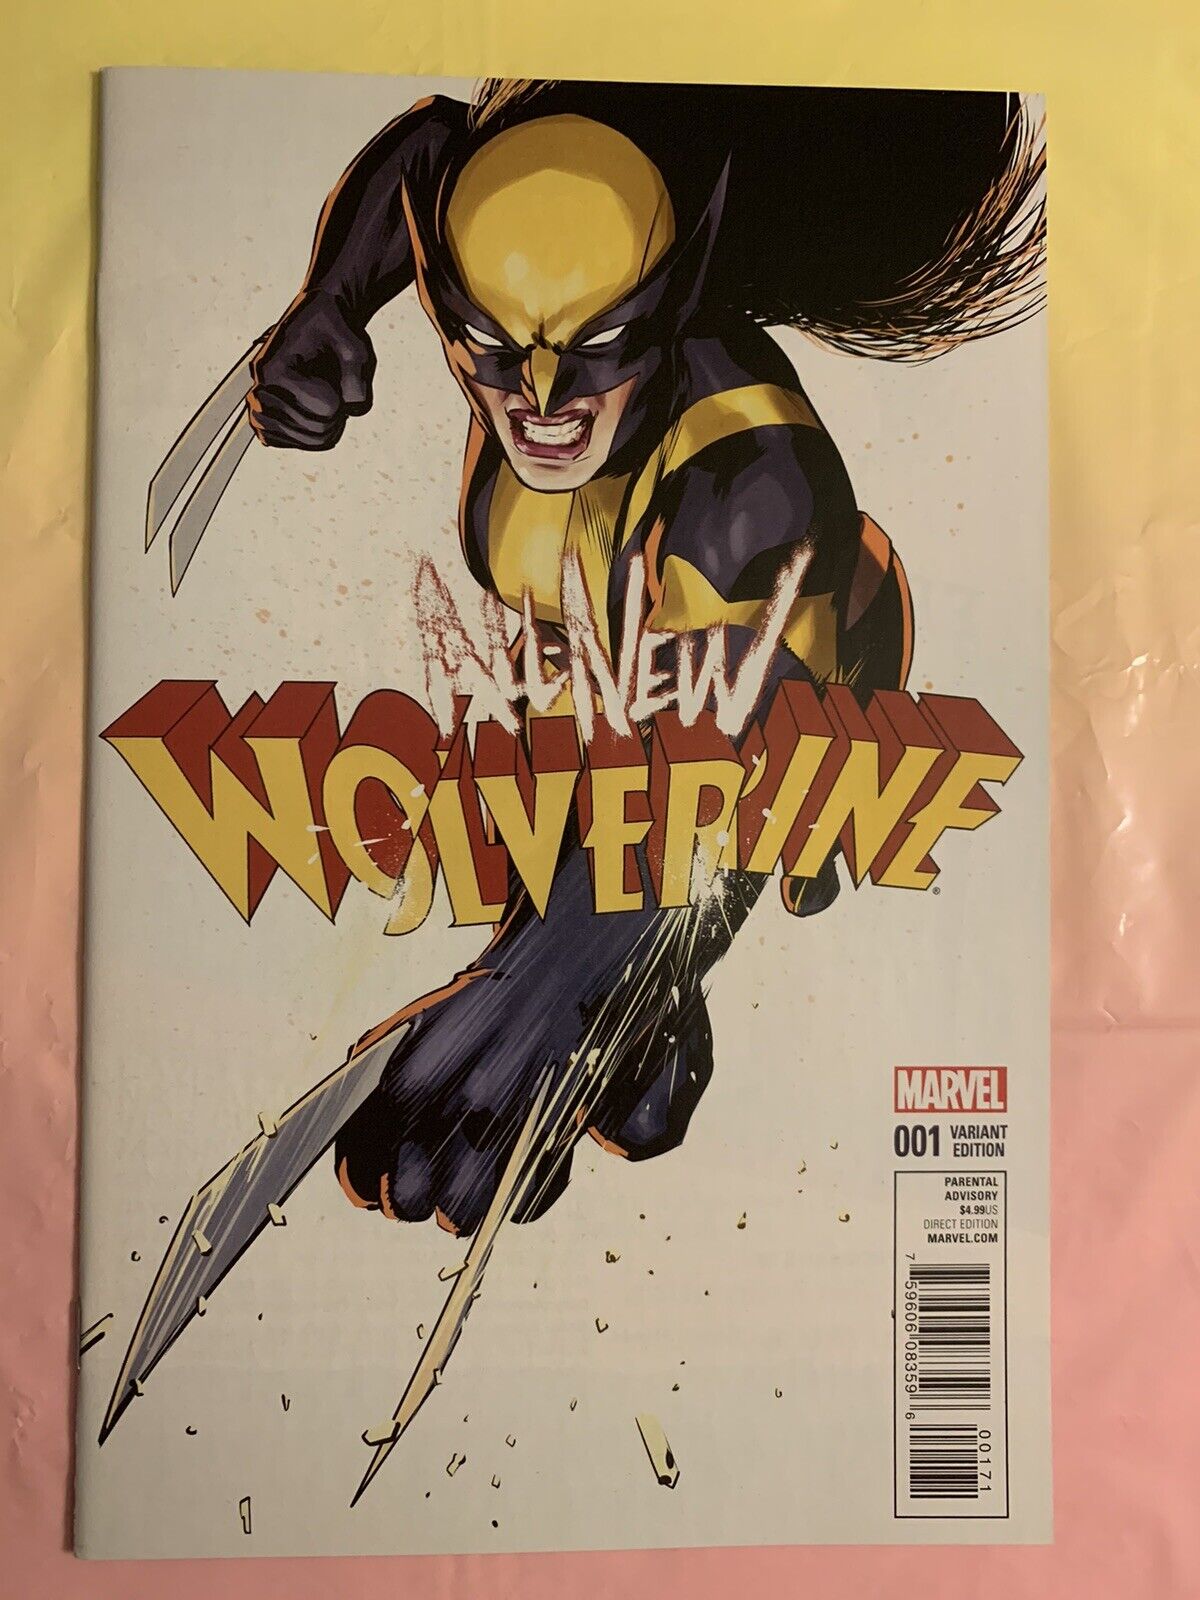 ALL-NEW WOLVERINE #1 DAVID LOPEZ 1:25 VARIANT, 1st LAURA KINNEY AS WOLVERINE NM